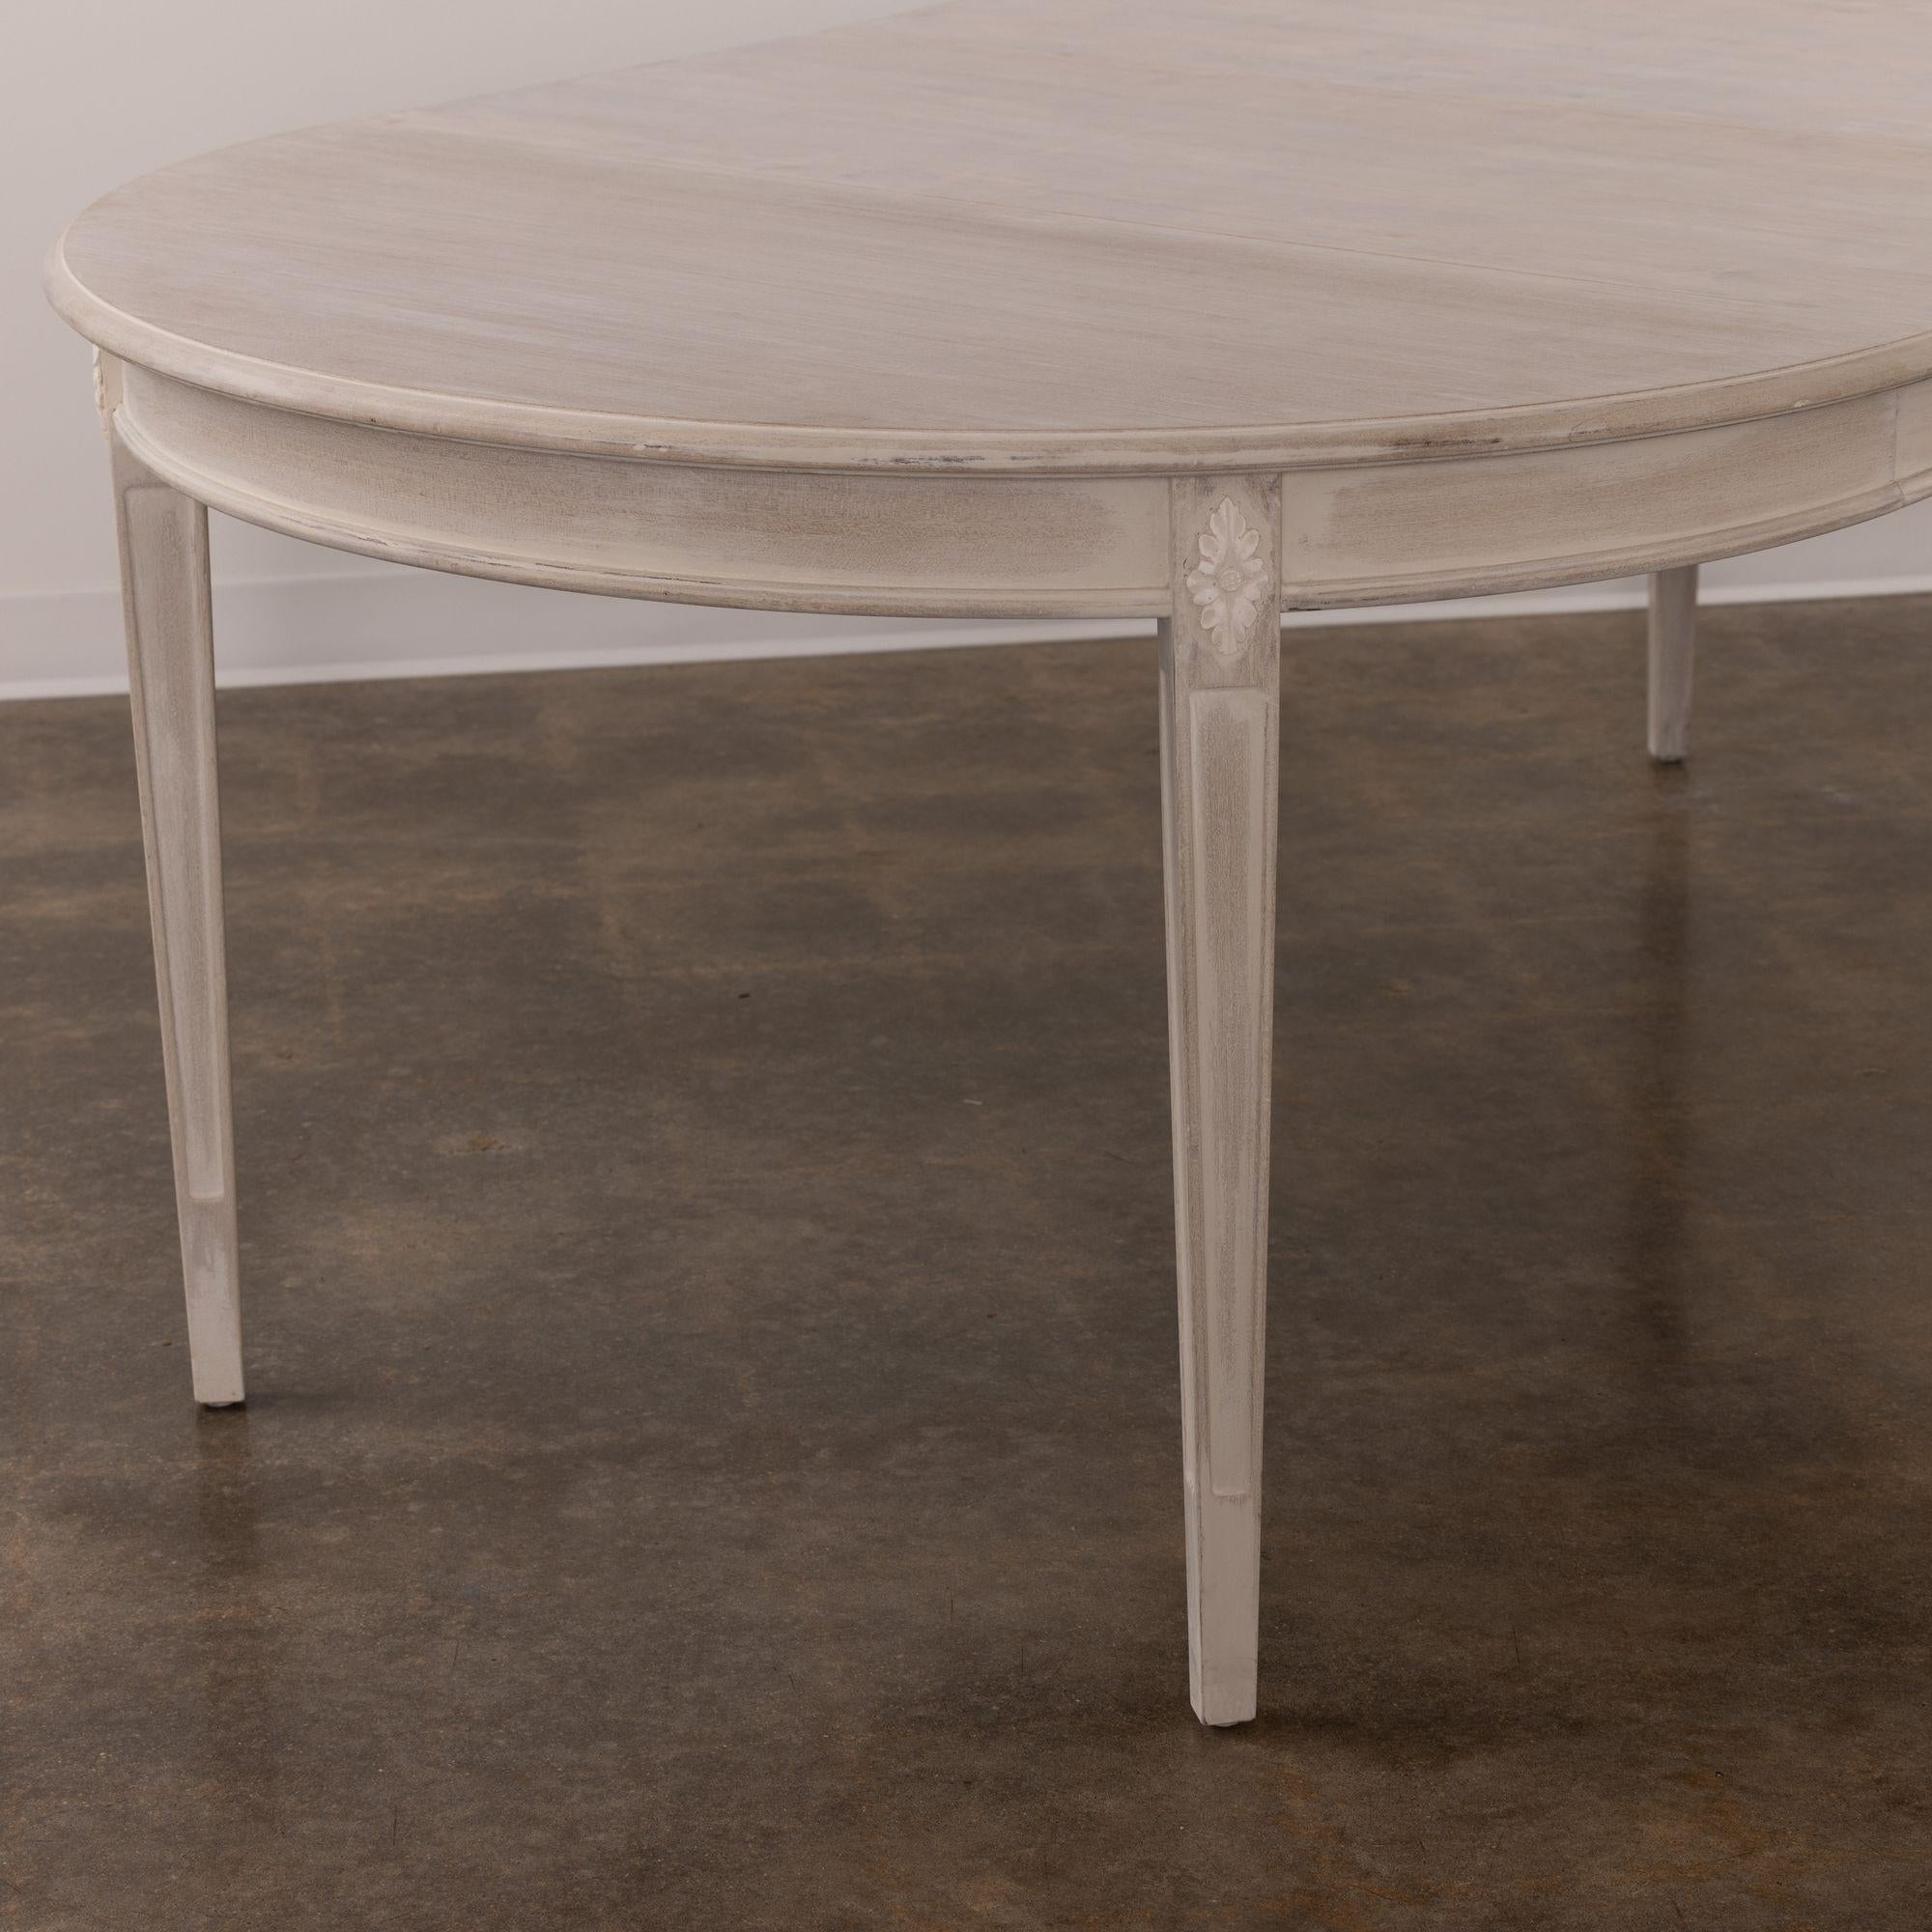 20th Century 19th c. Swedish Gustavian Bleached and Glazed Extension Table with Three Leaves